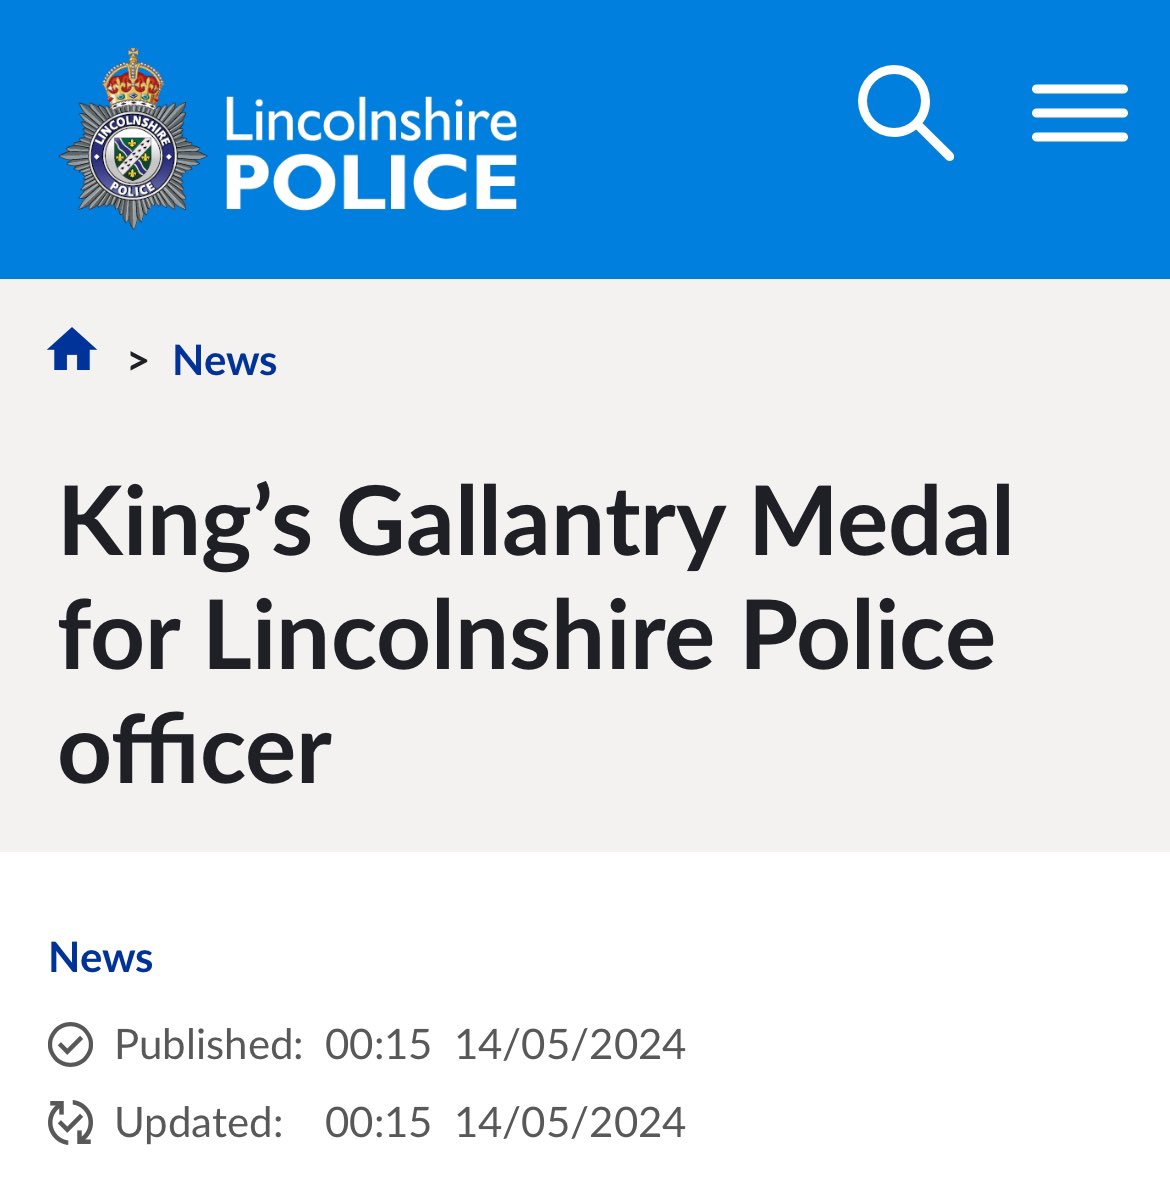 A Lincolnshire Police Officer has been awarded the King's Gallantry Medal for his heroic actions in apprehending a double murder suspect while off duty.

PC Steve Denniss was walking his dogs near the Hallington entrance at Hubbard’s Hill, Louth, on June 1st 2021, when he spotted…